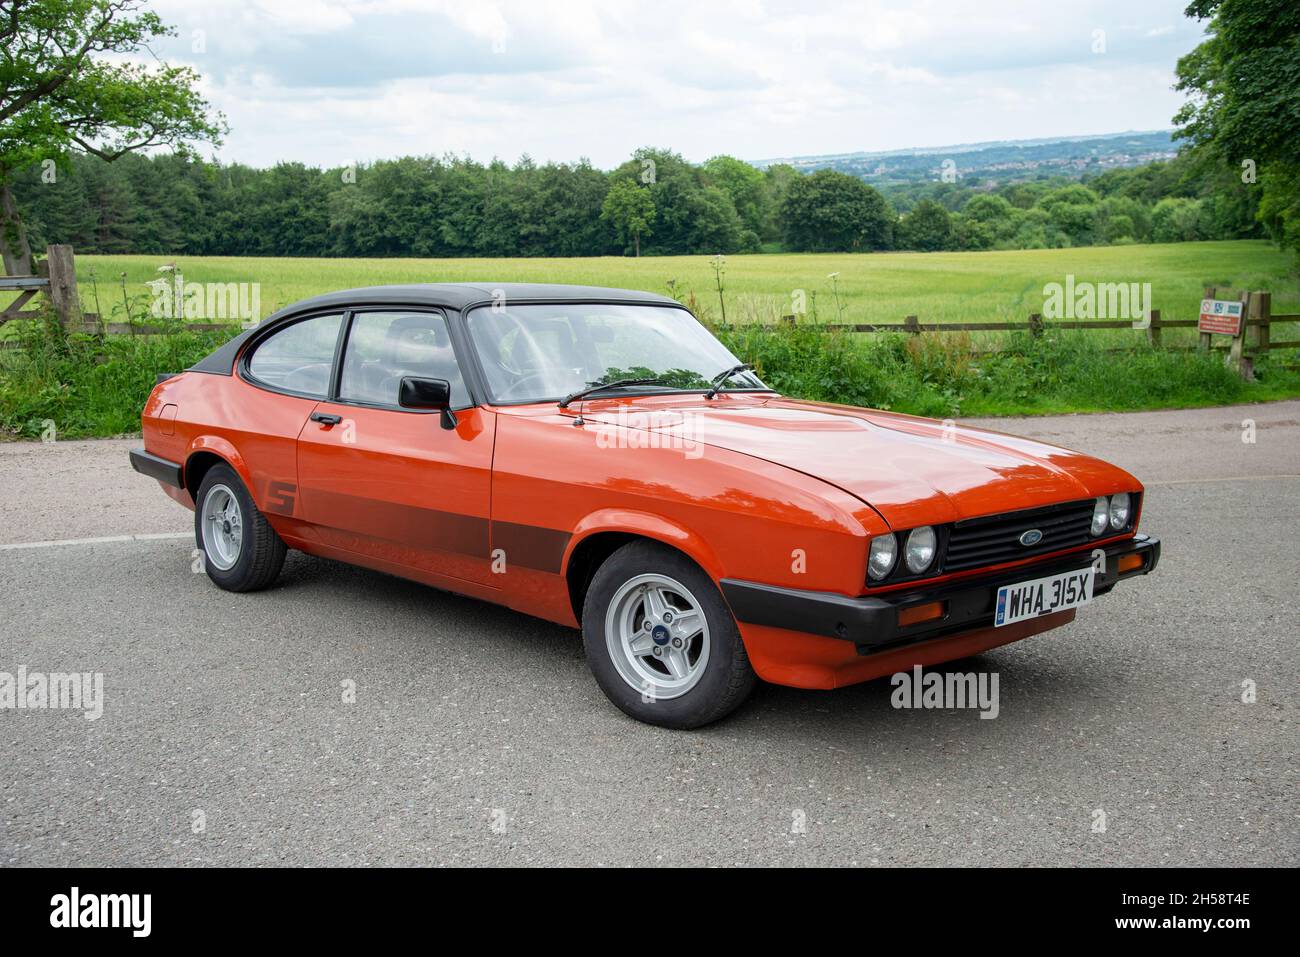 Ford Capri 1.6S with vinyl roof parked on a country lane in Summer with fields and trees behind Stock Photo